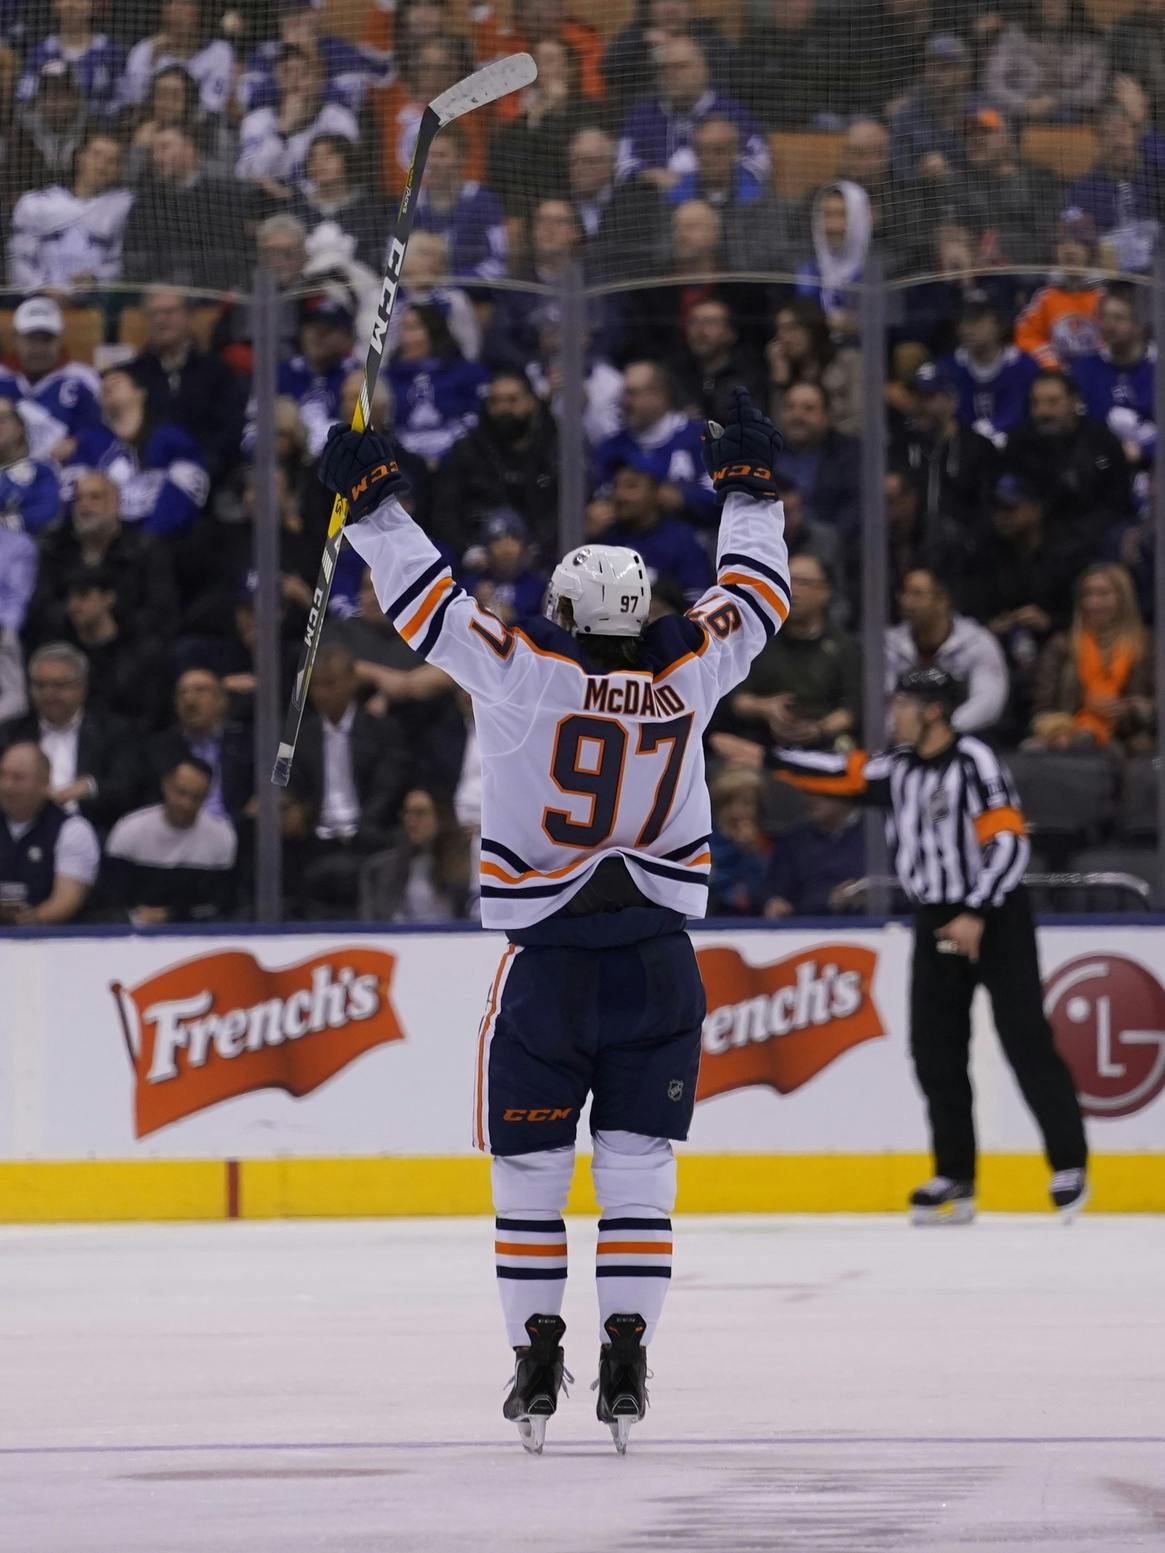 Oilers Vs Maple Leafs 012021 Odds And Nhl Betting Trends Oilersnation 